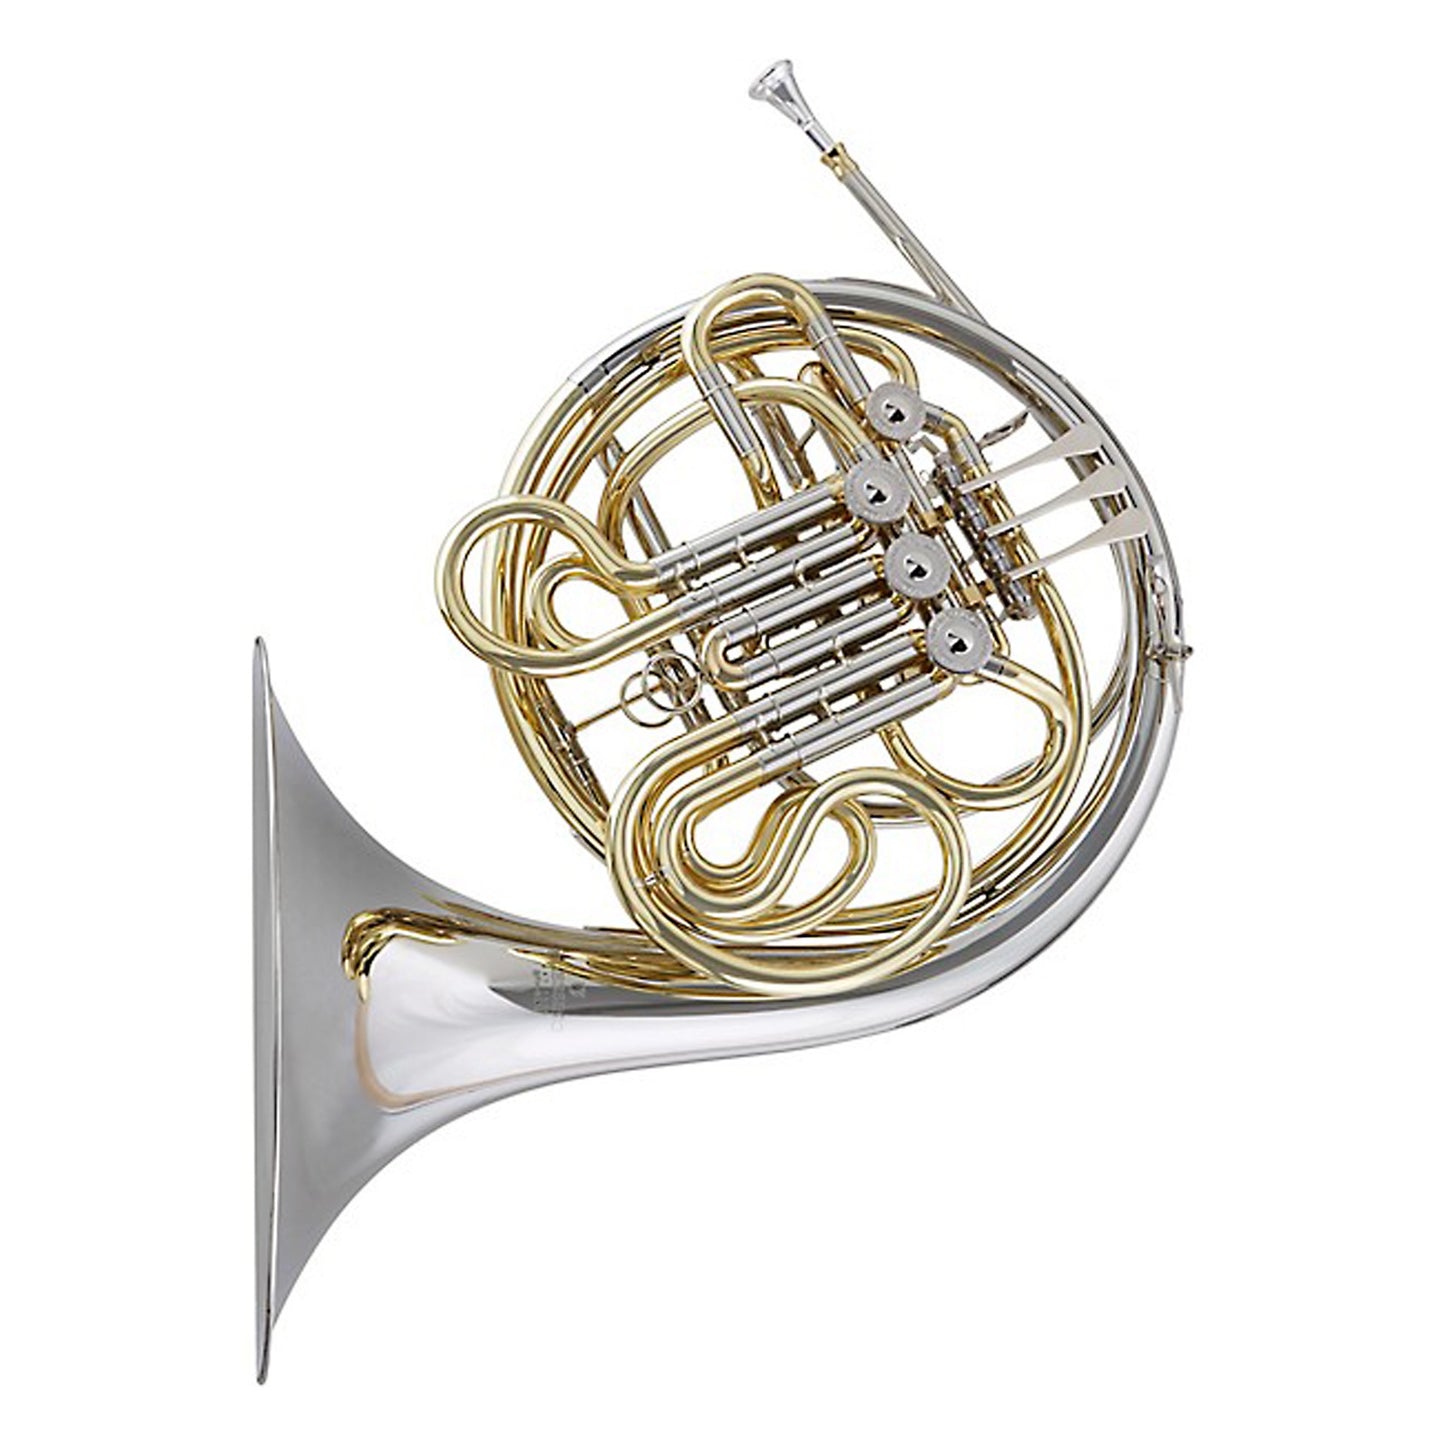 P. Mauriat 71 Bb Trumpet - Silver Plated